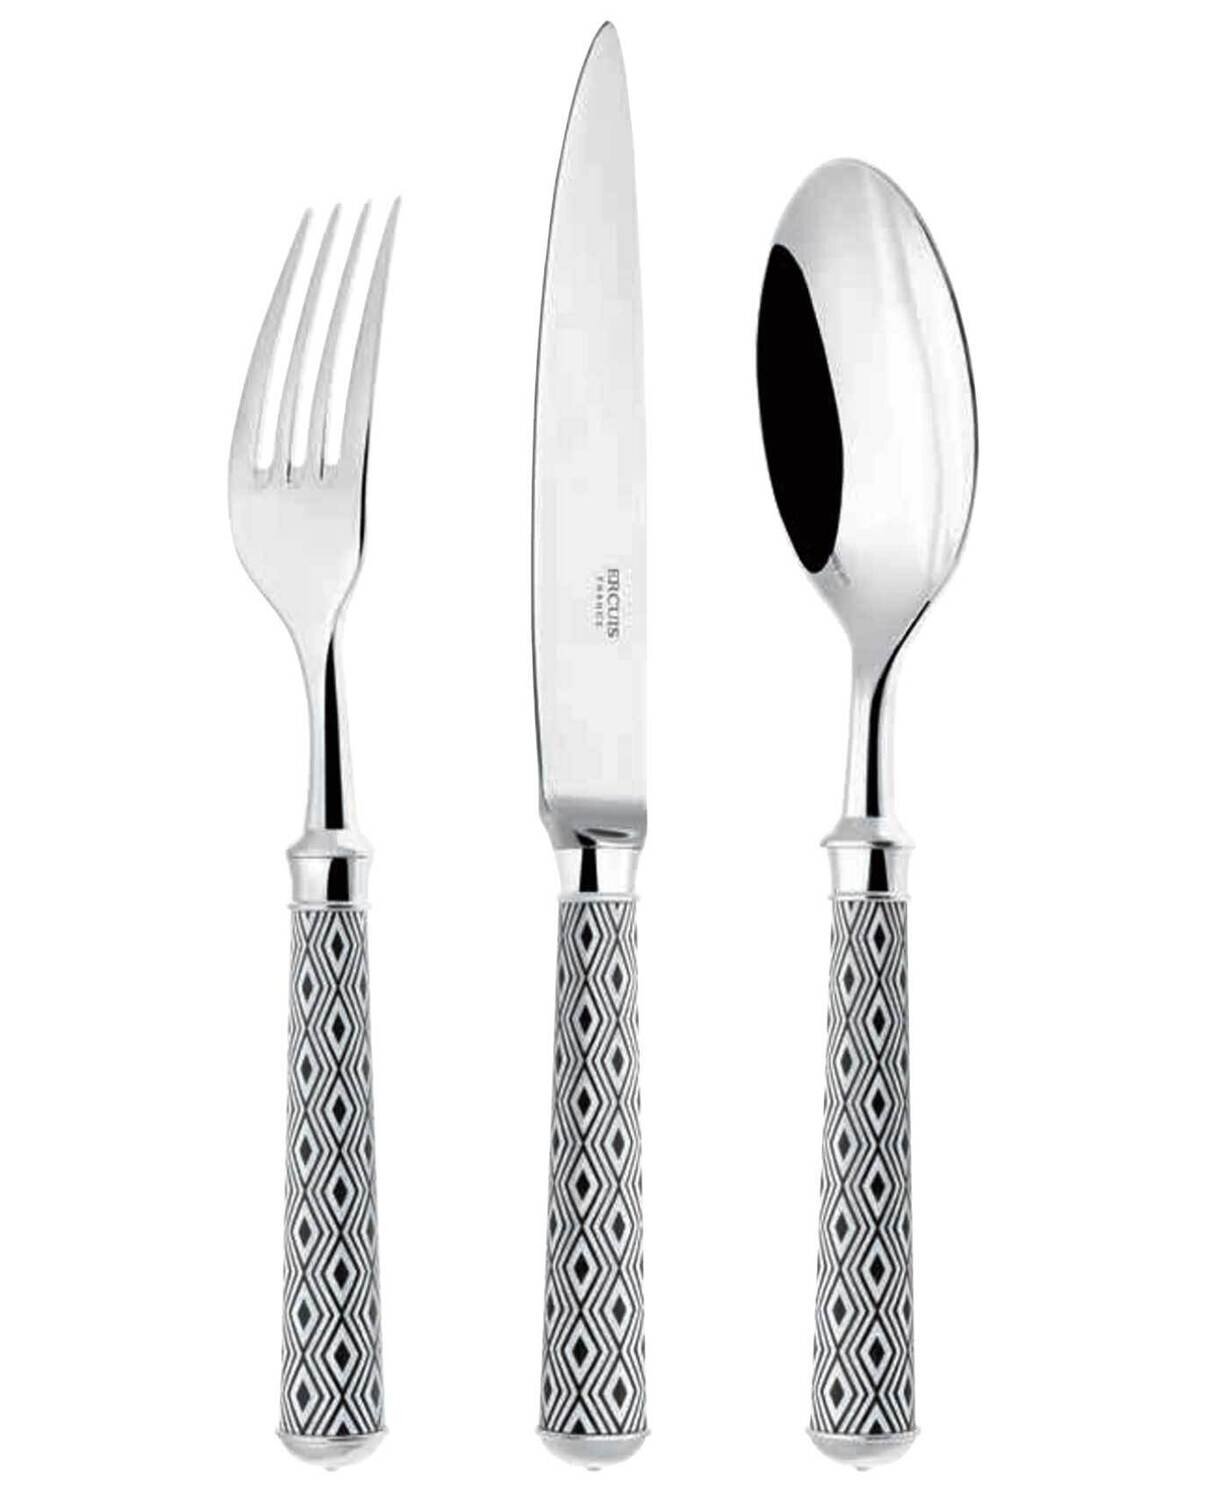 Ercuis Arlequin Chocolate Dinner Fork 8.375 Inch Silver Plated Part Golded F60254D-02